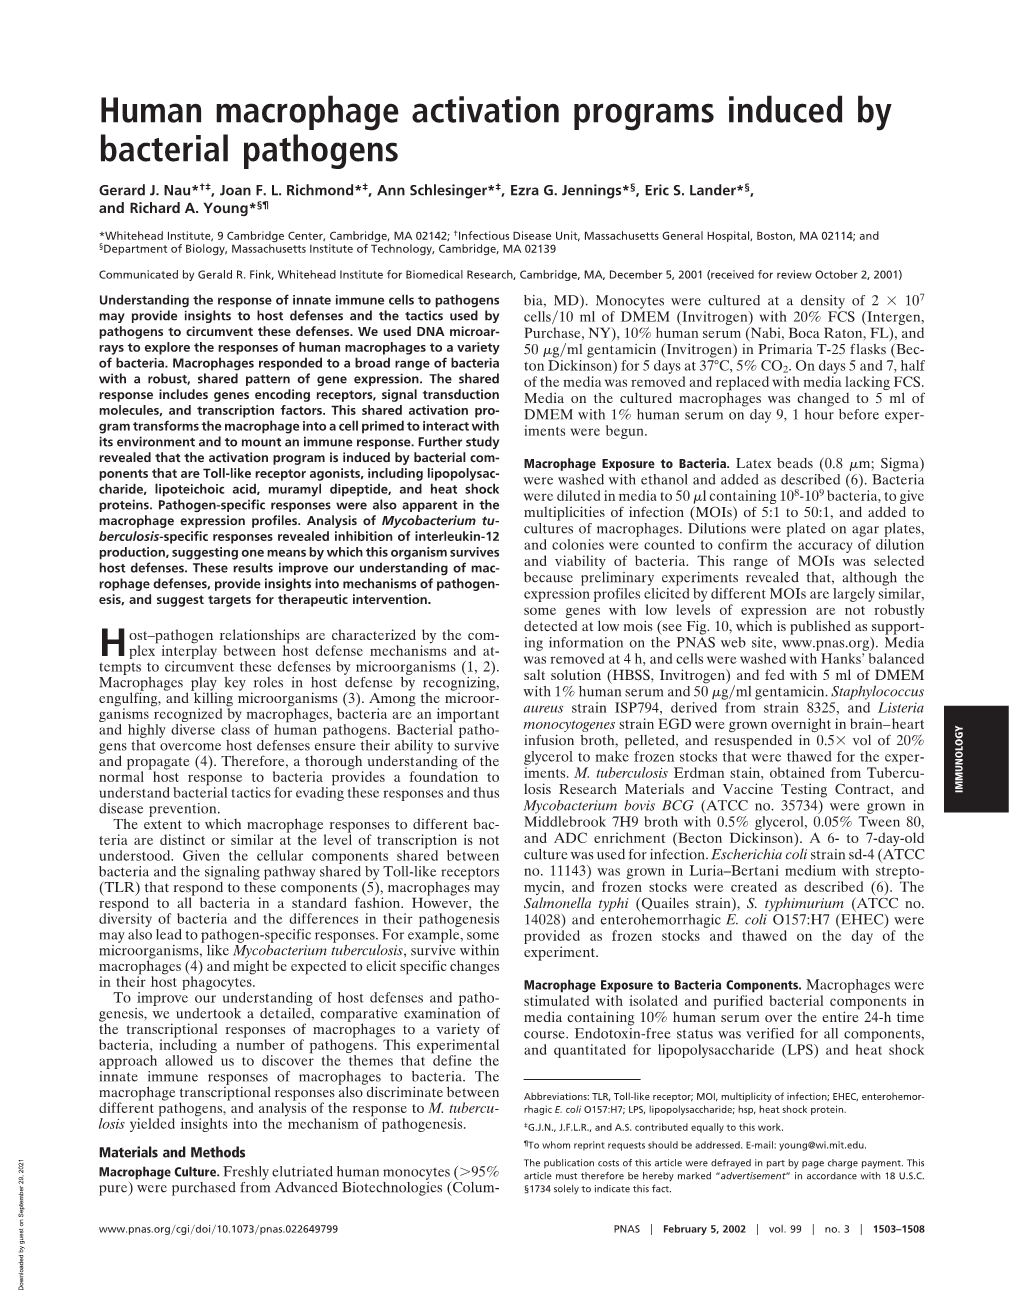 Human Macrophage Activation Programs Induced by Bacterial Pathogens